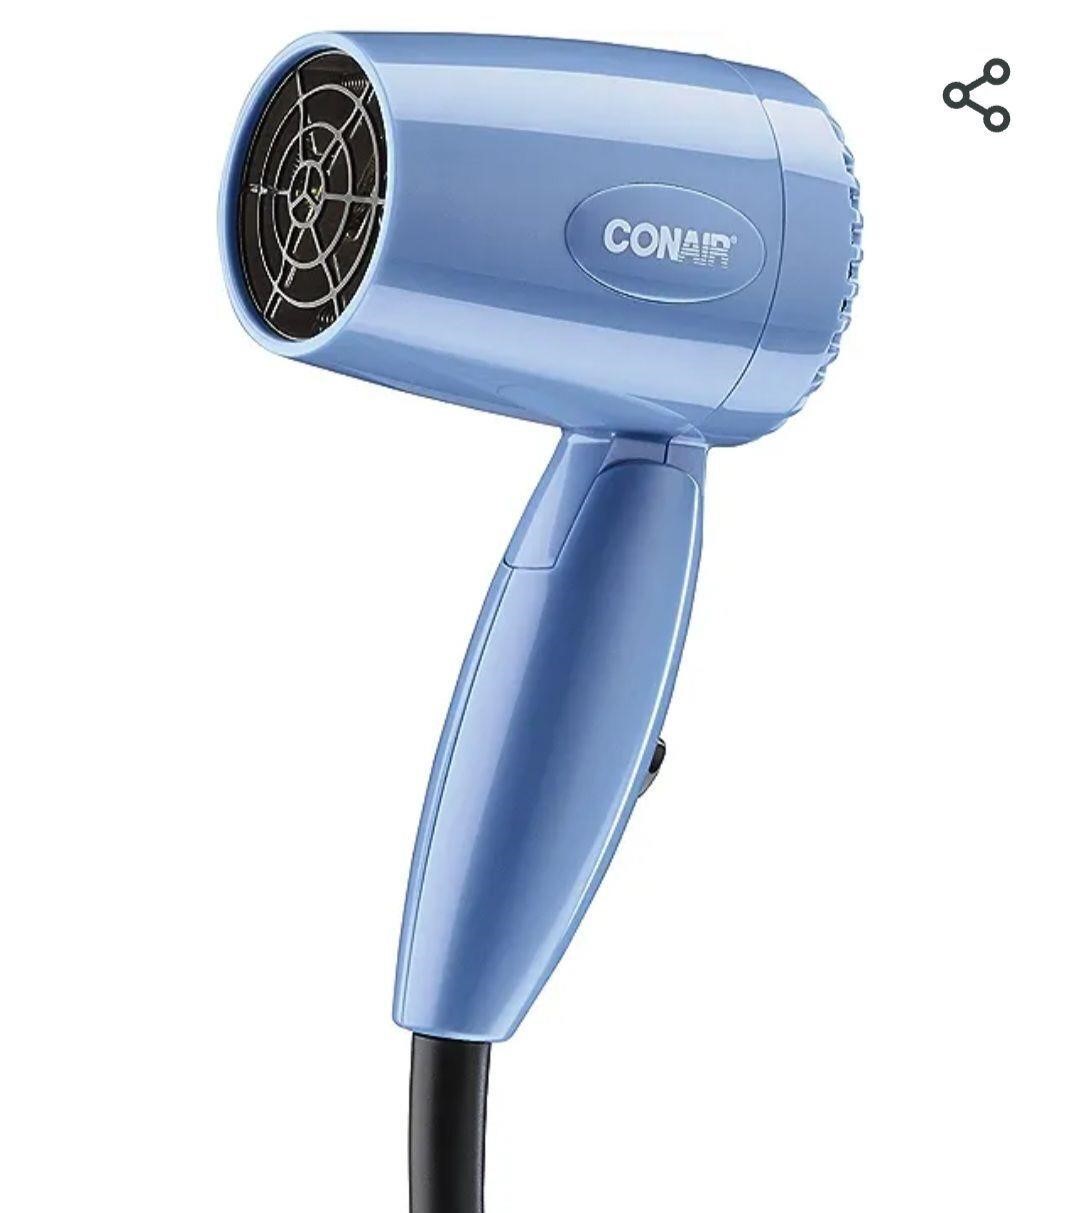 Conair Travel Hair Dryer with Dual Voltage1600W